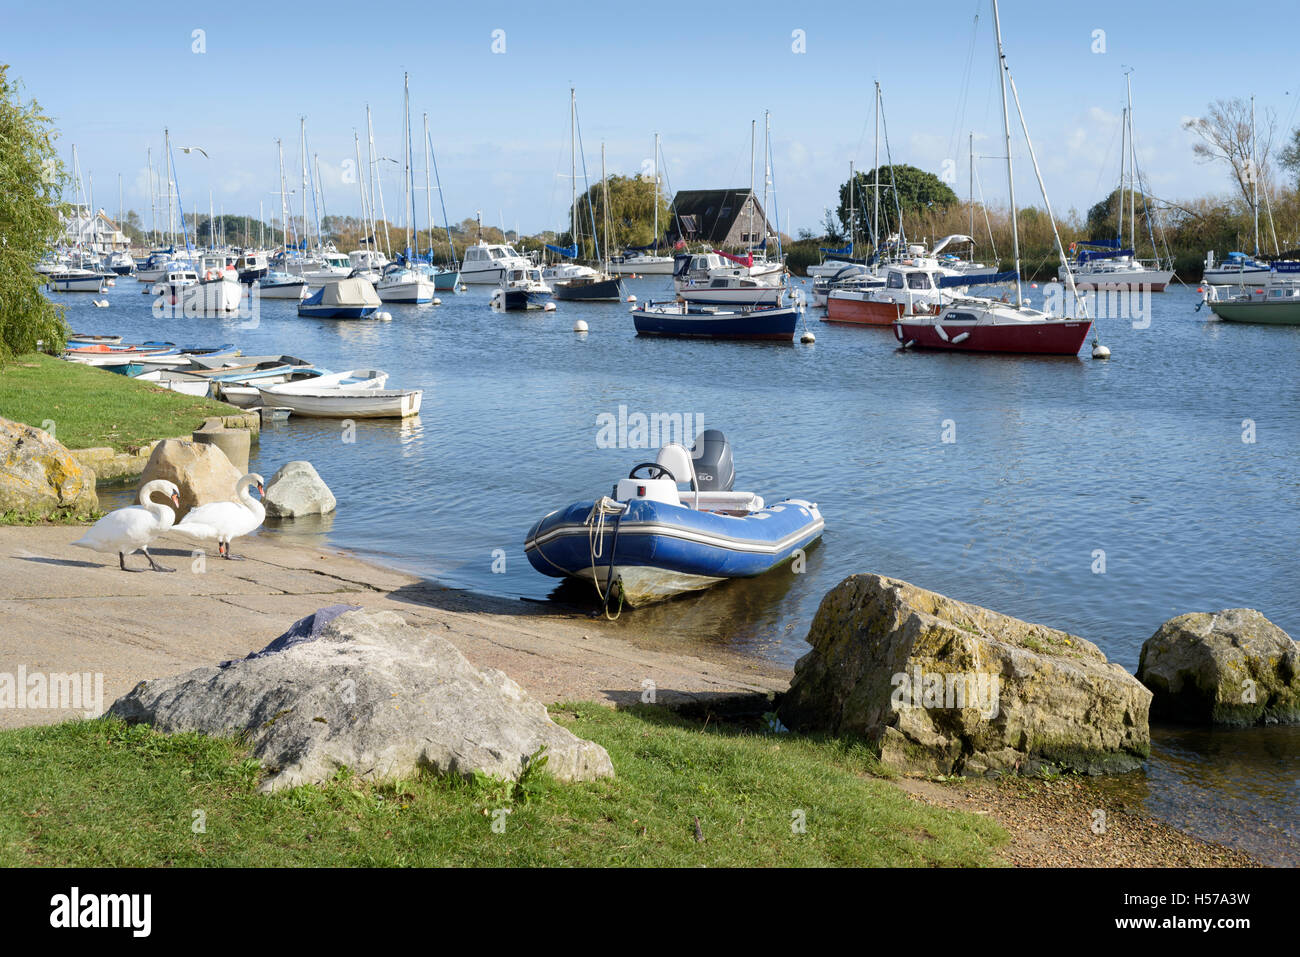 Mayors Mead public slipway on the River Stour, Christchurch, Dorset, England, UK Stock Photo